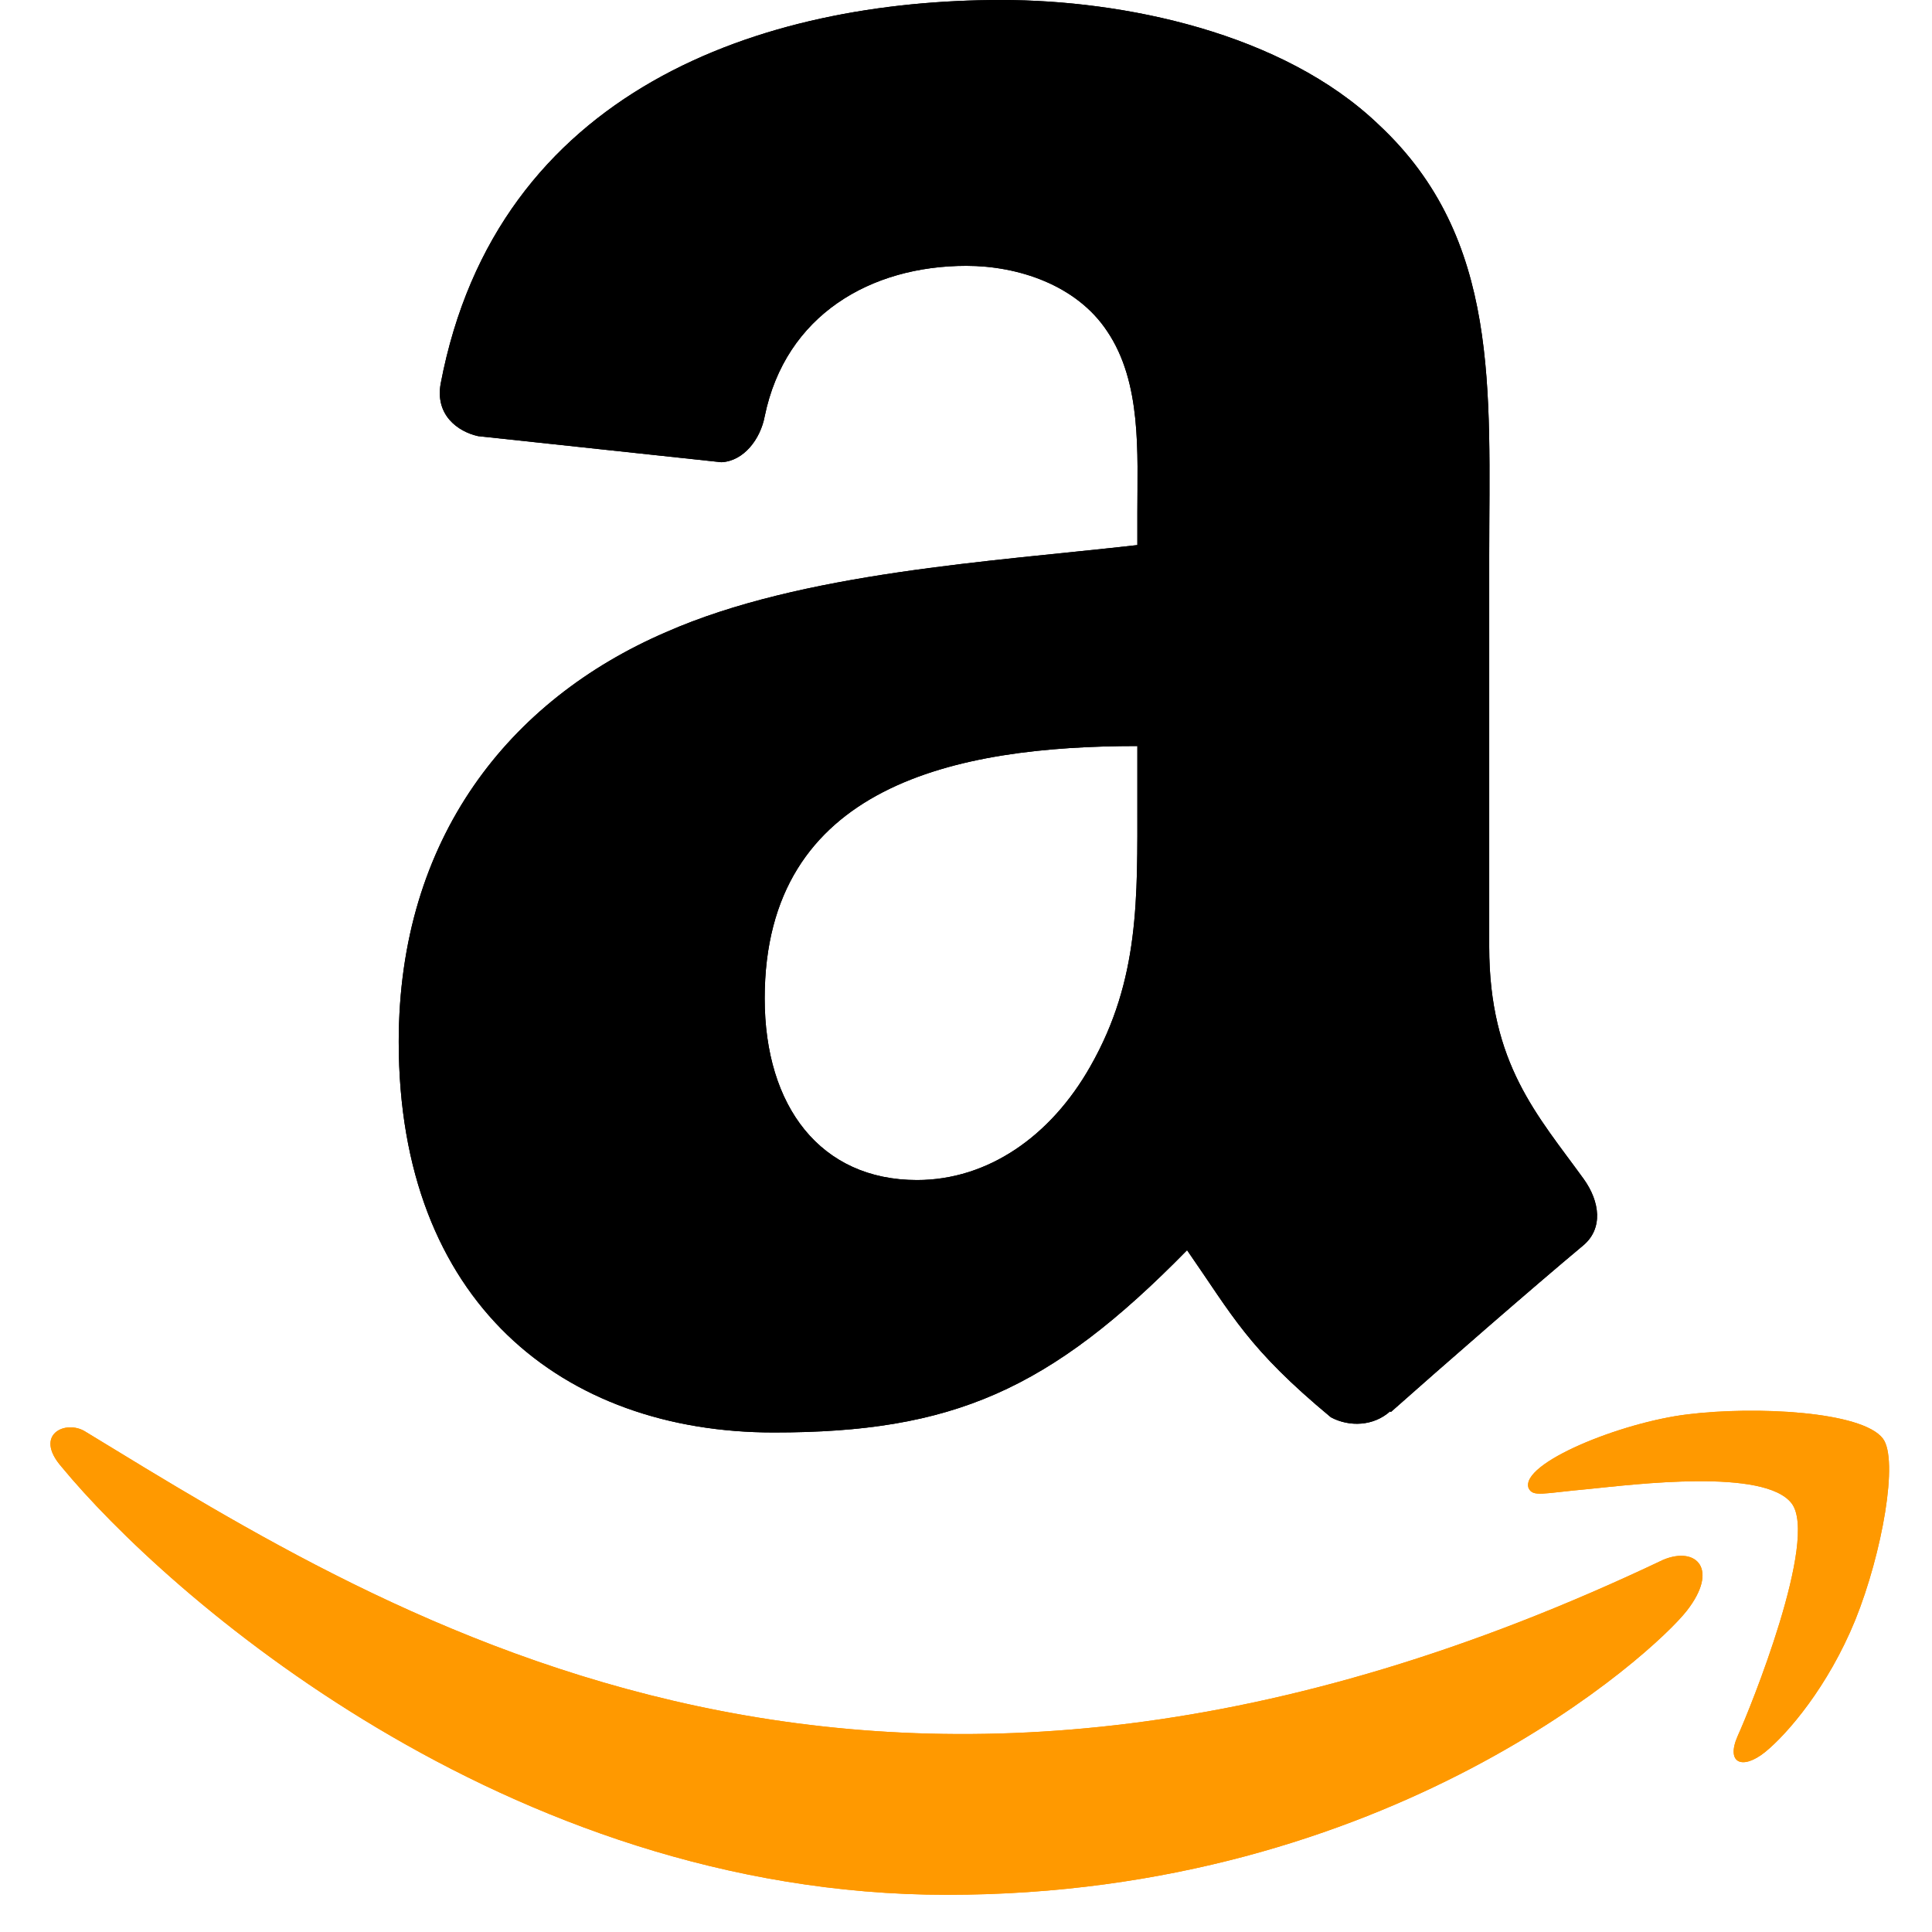 Amazon_icon.svg.png